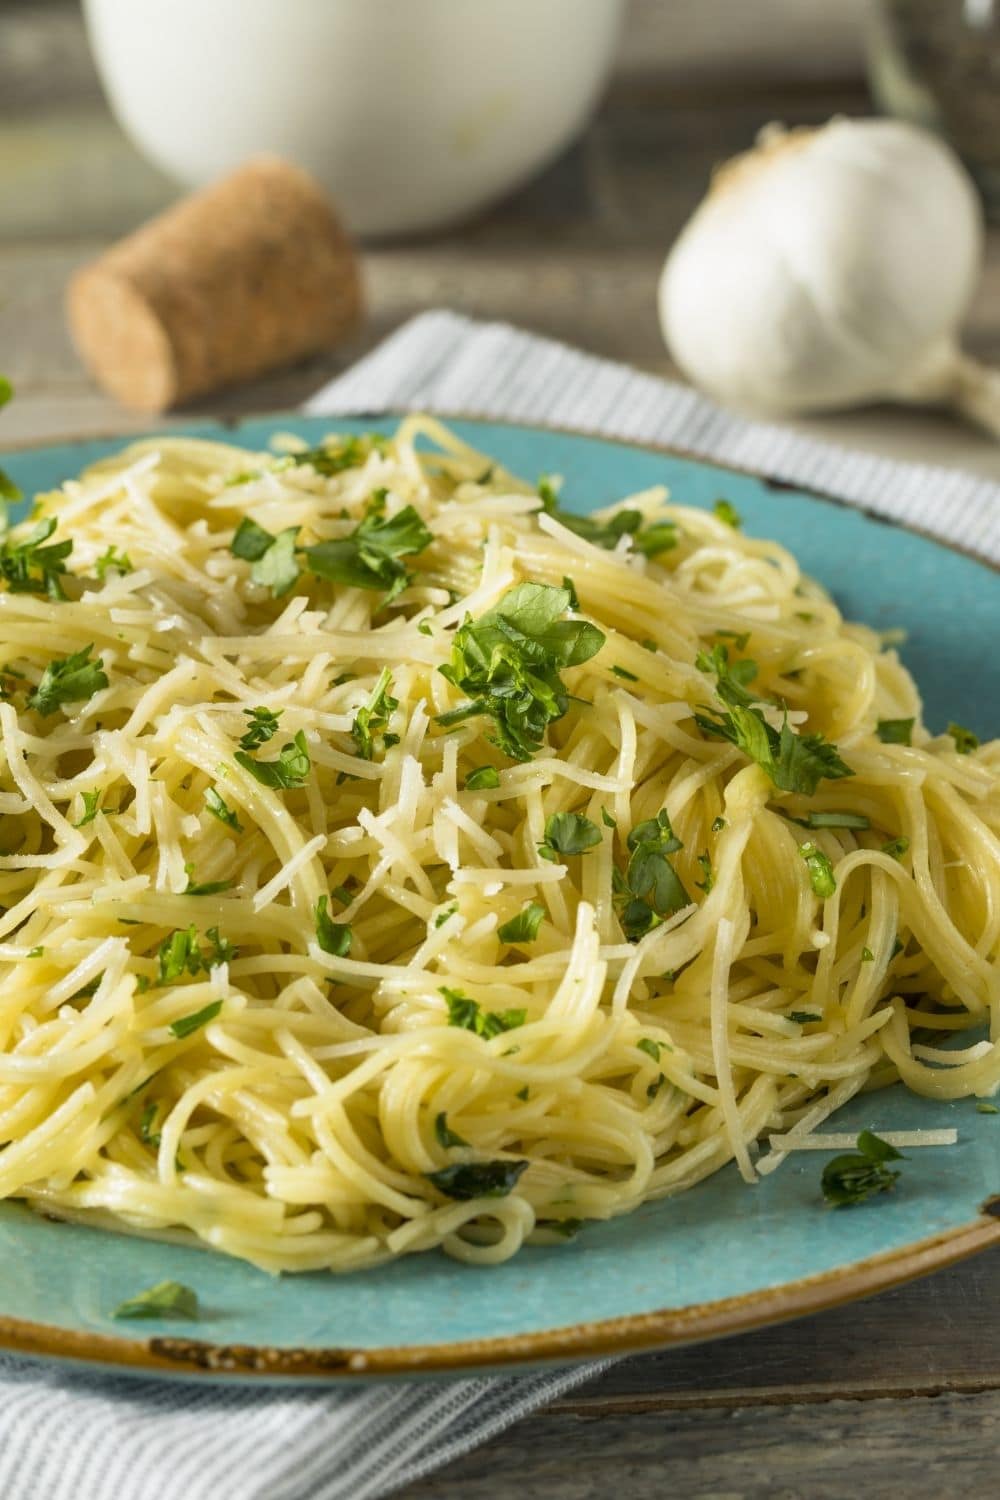 20 Best Weight Watchers Pasta Recipes - Insanely Good